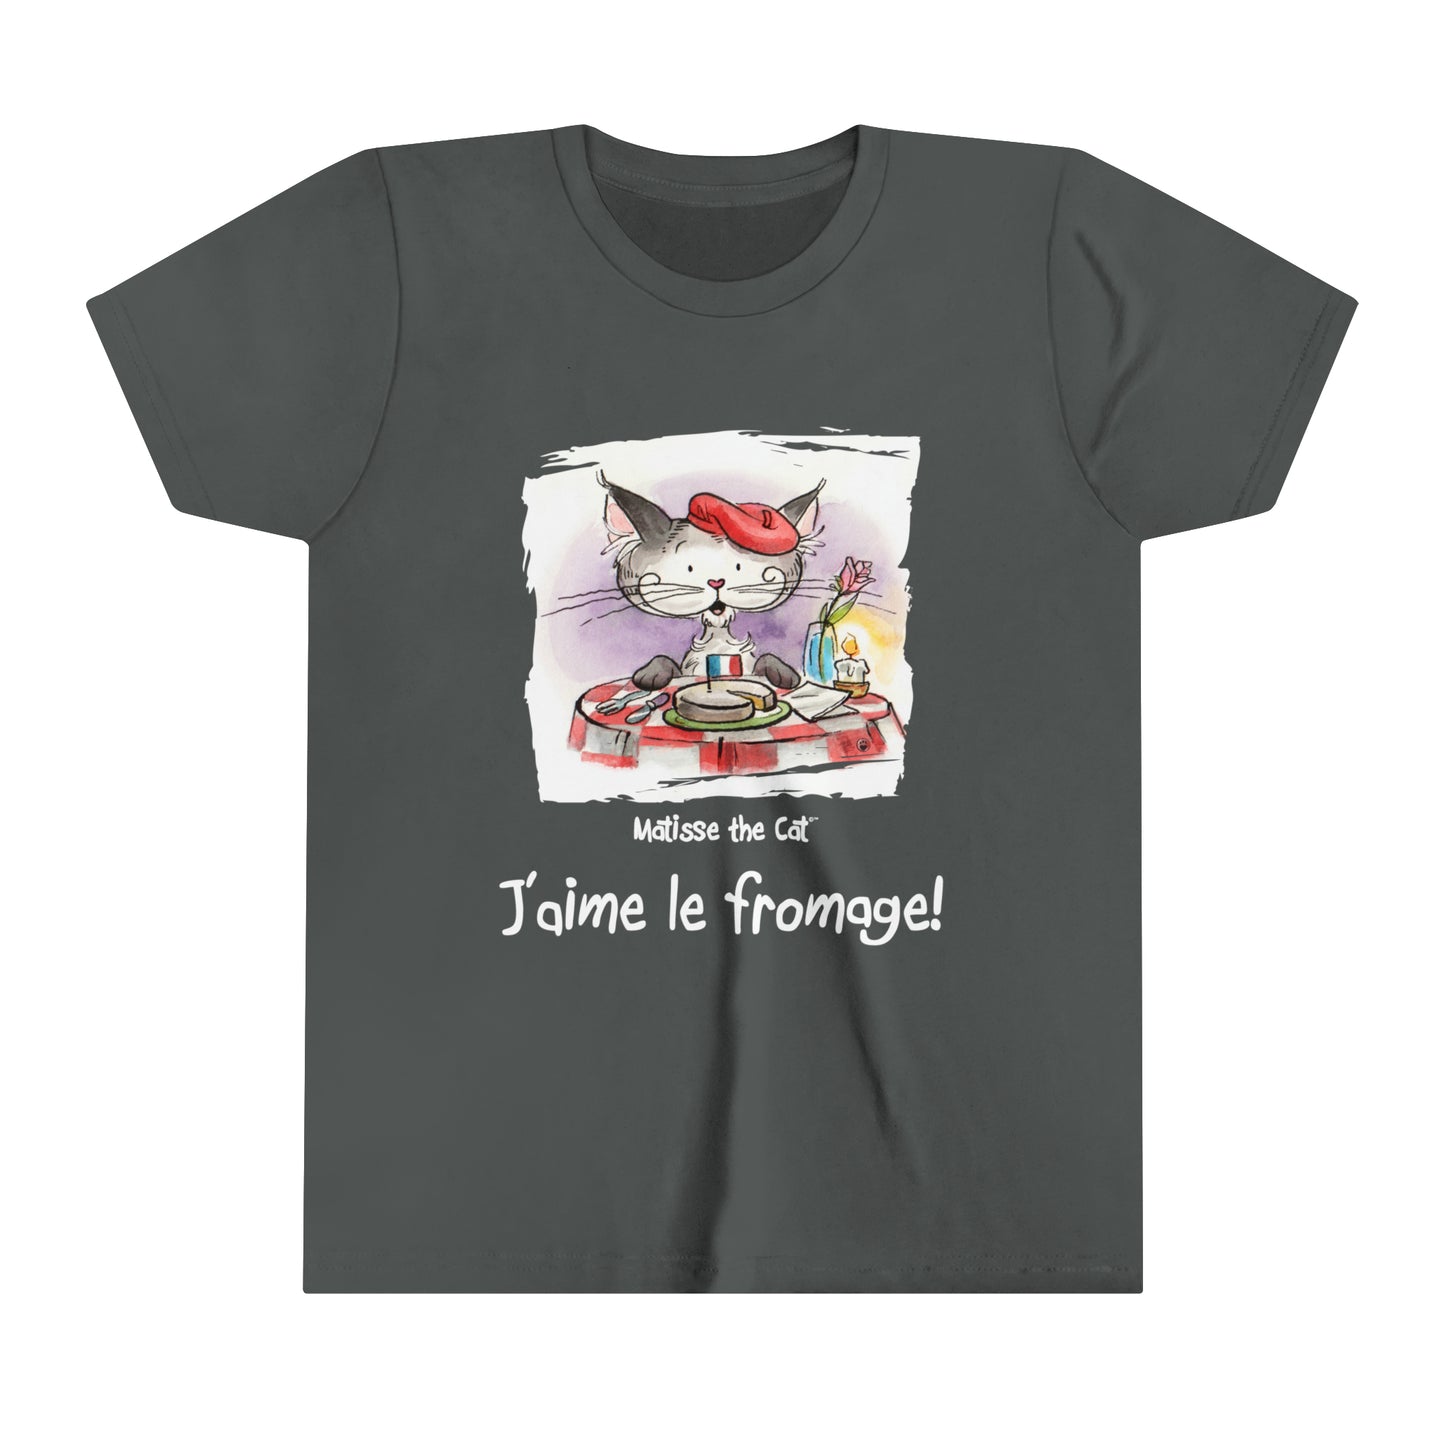 An asphalt grey official, Matisse the Cat children’s t-shirt with the slogan ‘Jaime le fromage ‘ showcases Matisse sitting at a French bistro table preparing to eat cheese.